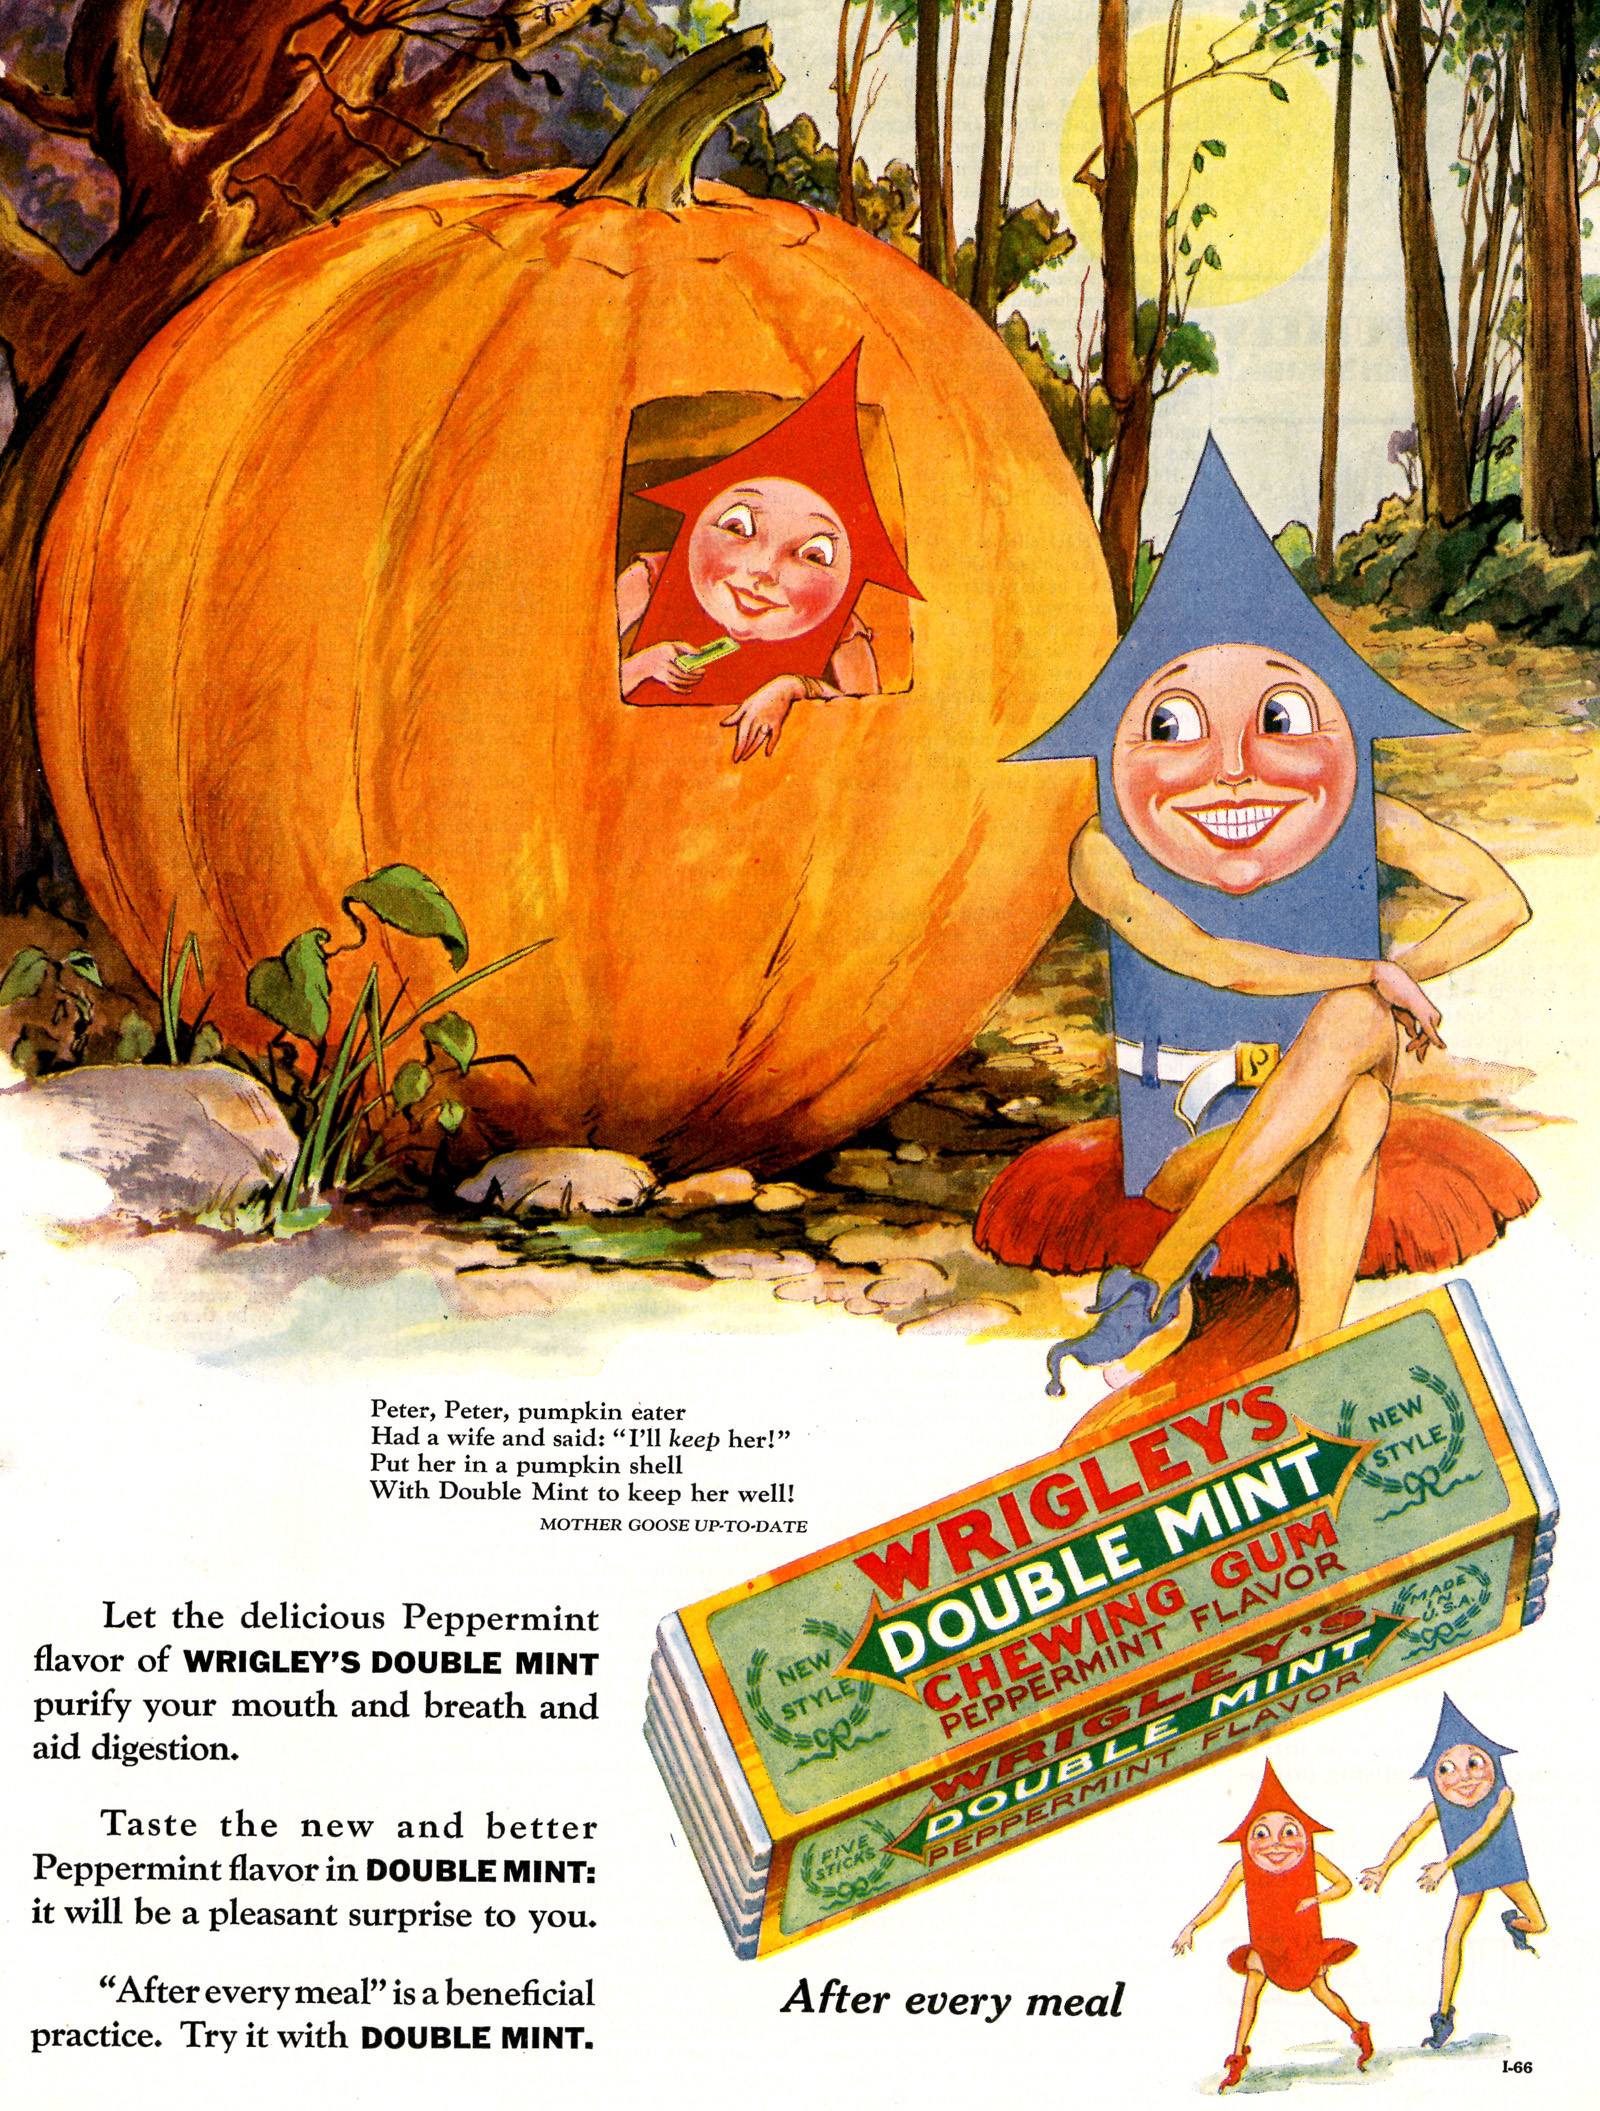 Wrigley's Double Mint - published in The Country Gentleman - October 1928